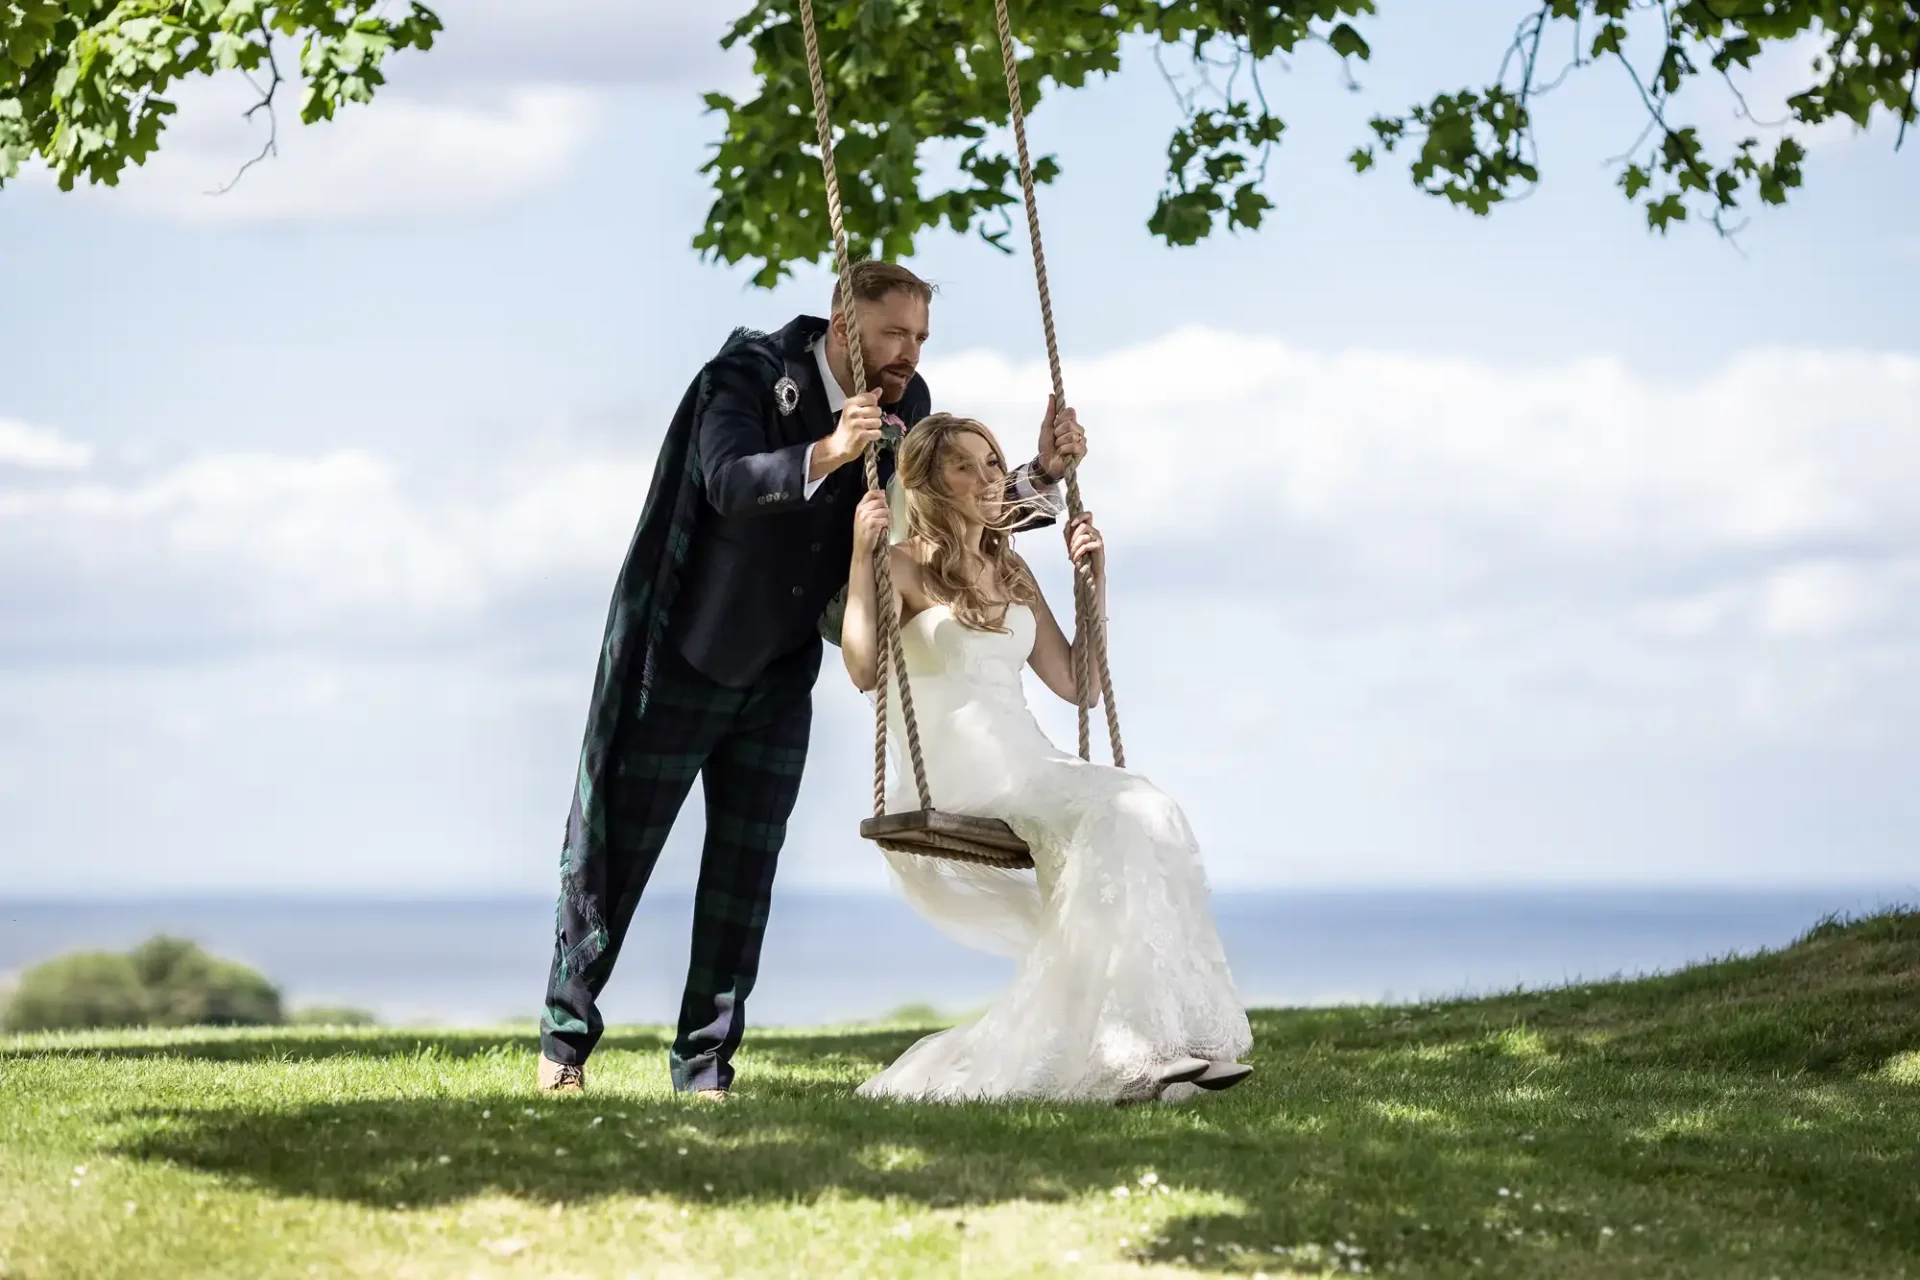 A groom in a tartan kilt pushing a bride on a swing under a tree, with a scenic lake and clear sky in the background.